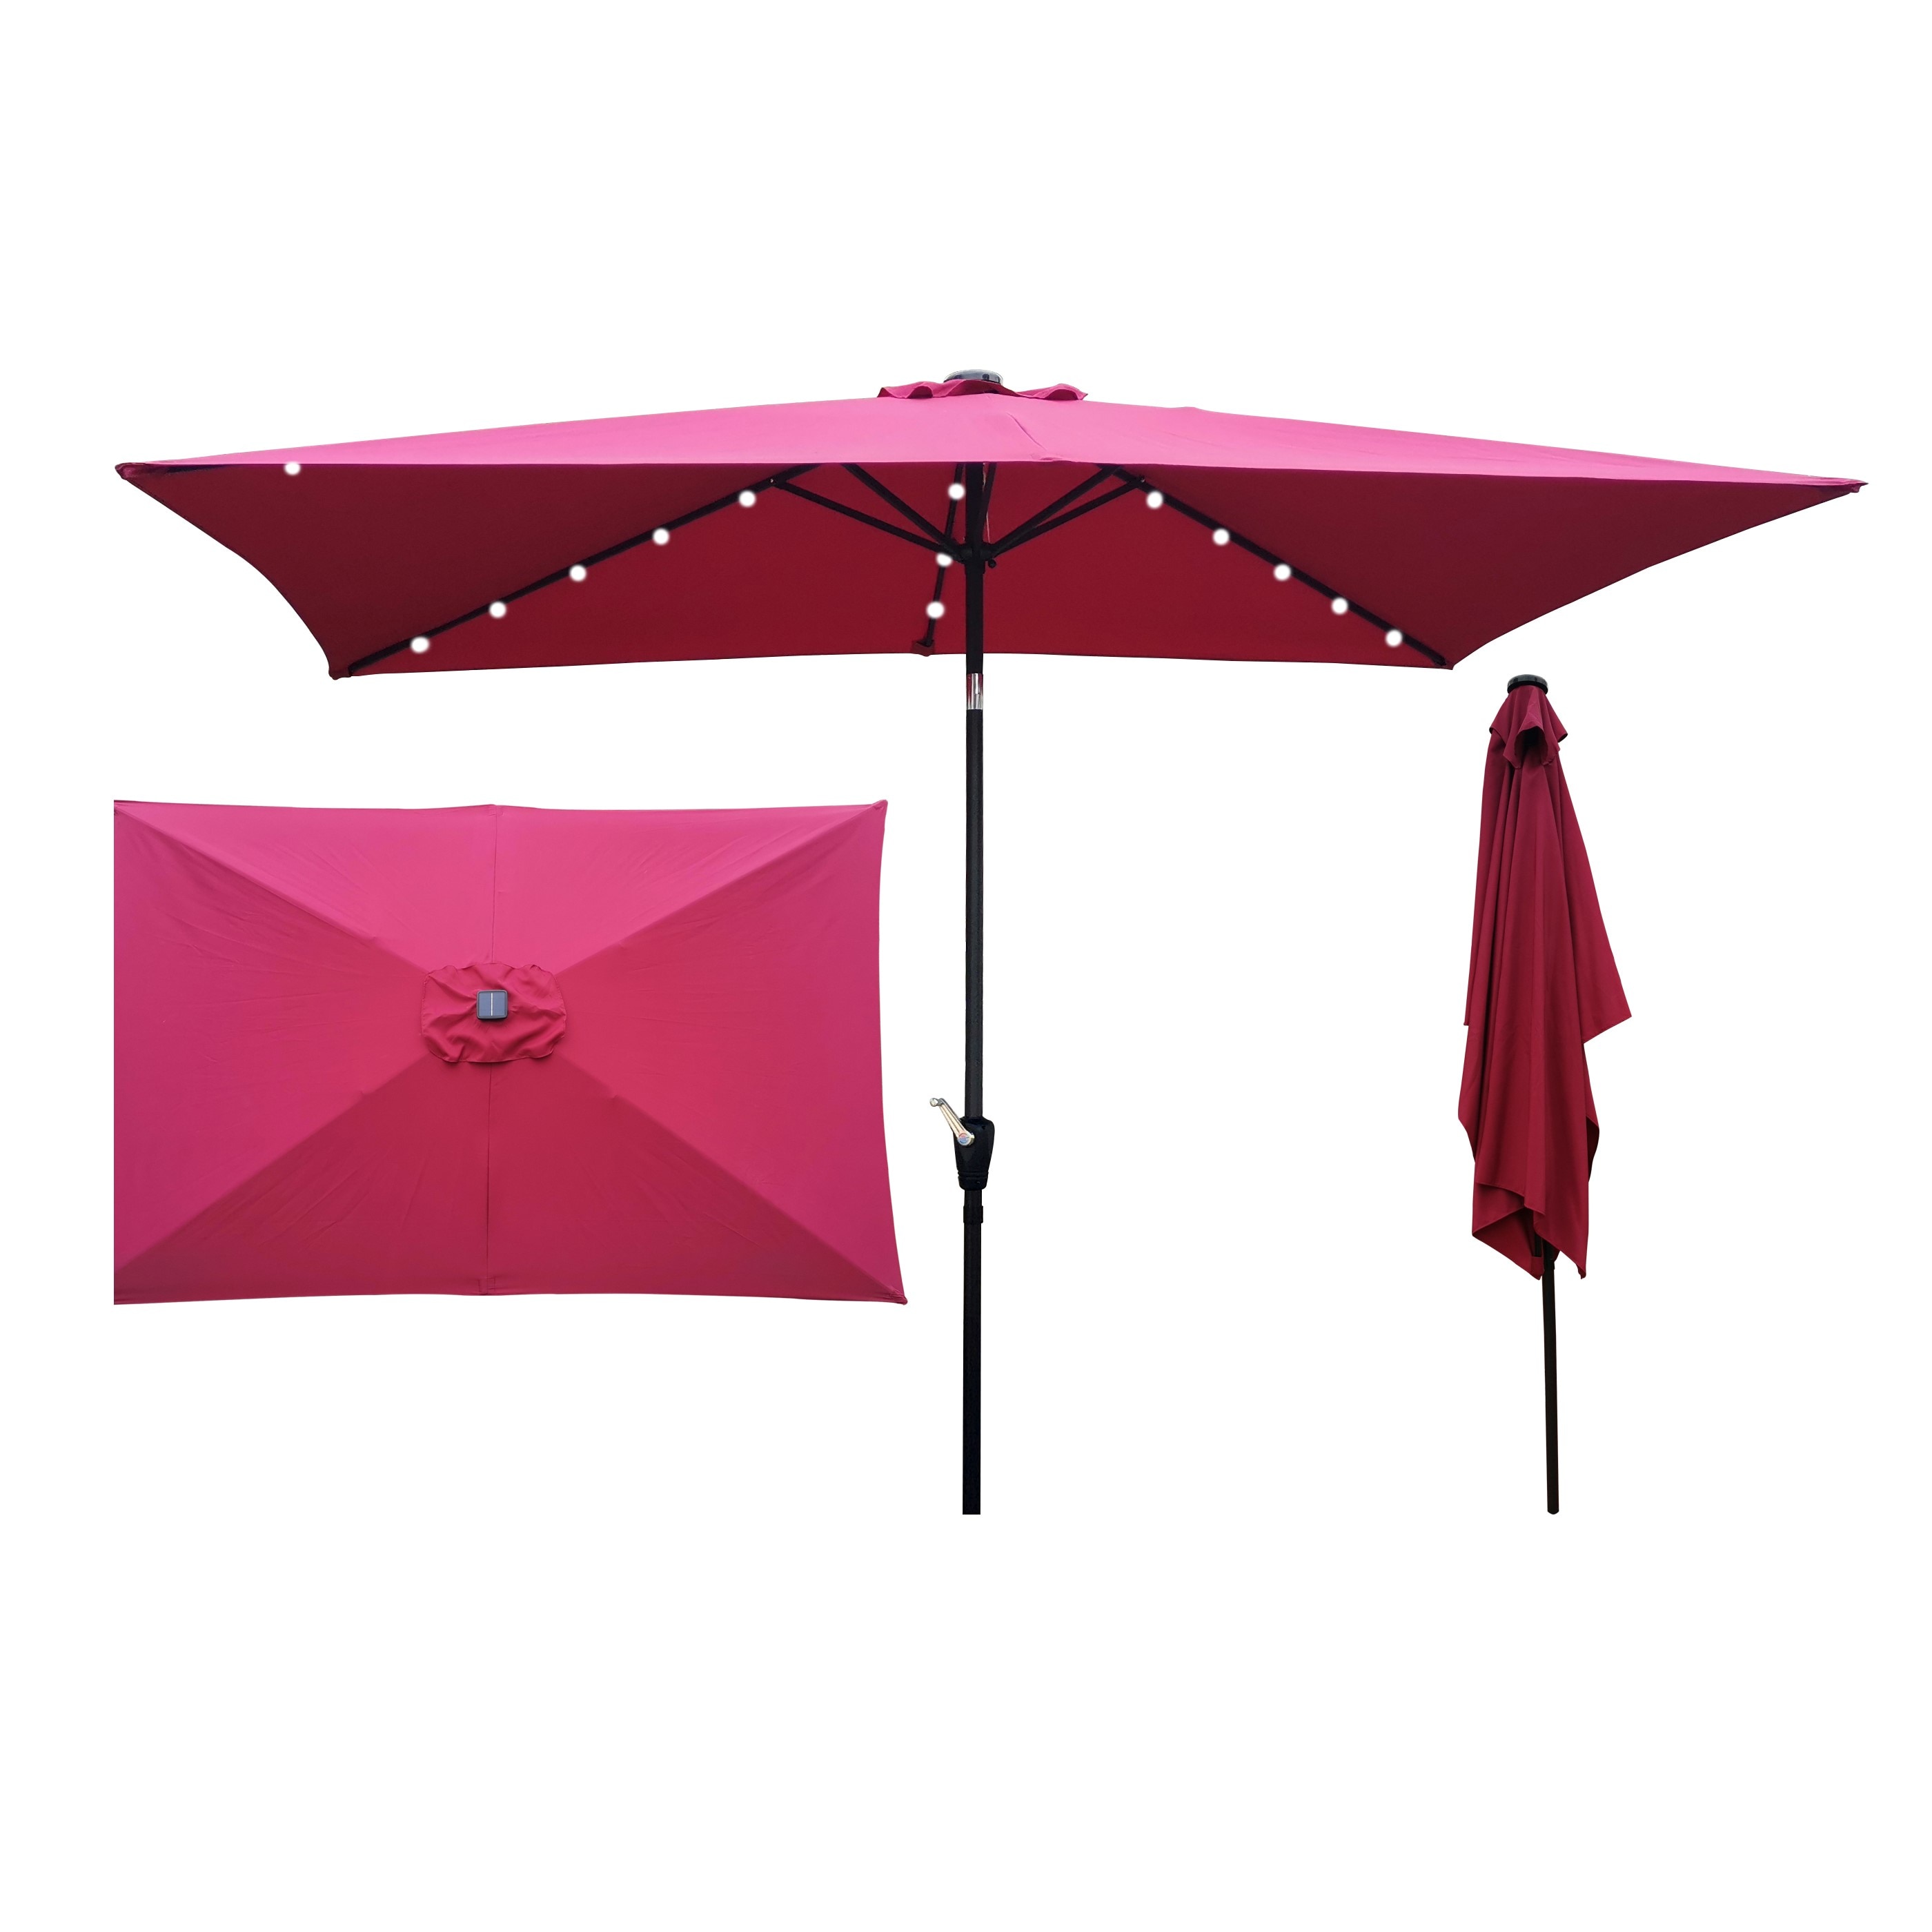 10x6.5ft Outdoor Umbrella Canopy Cover Top Replacement Umbrella Rectangle Red 